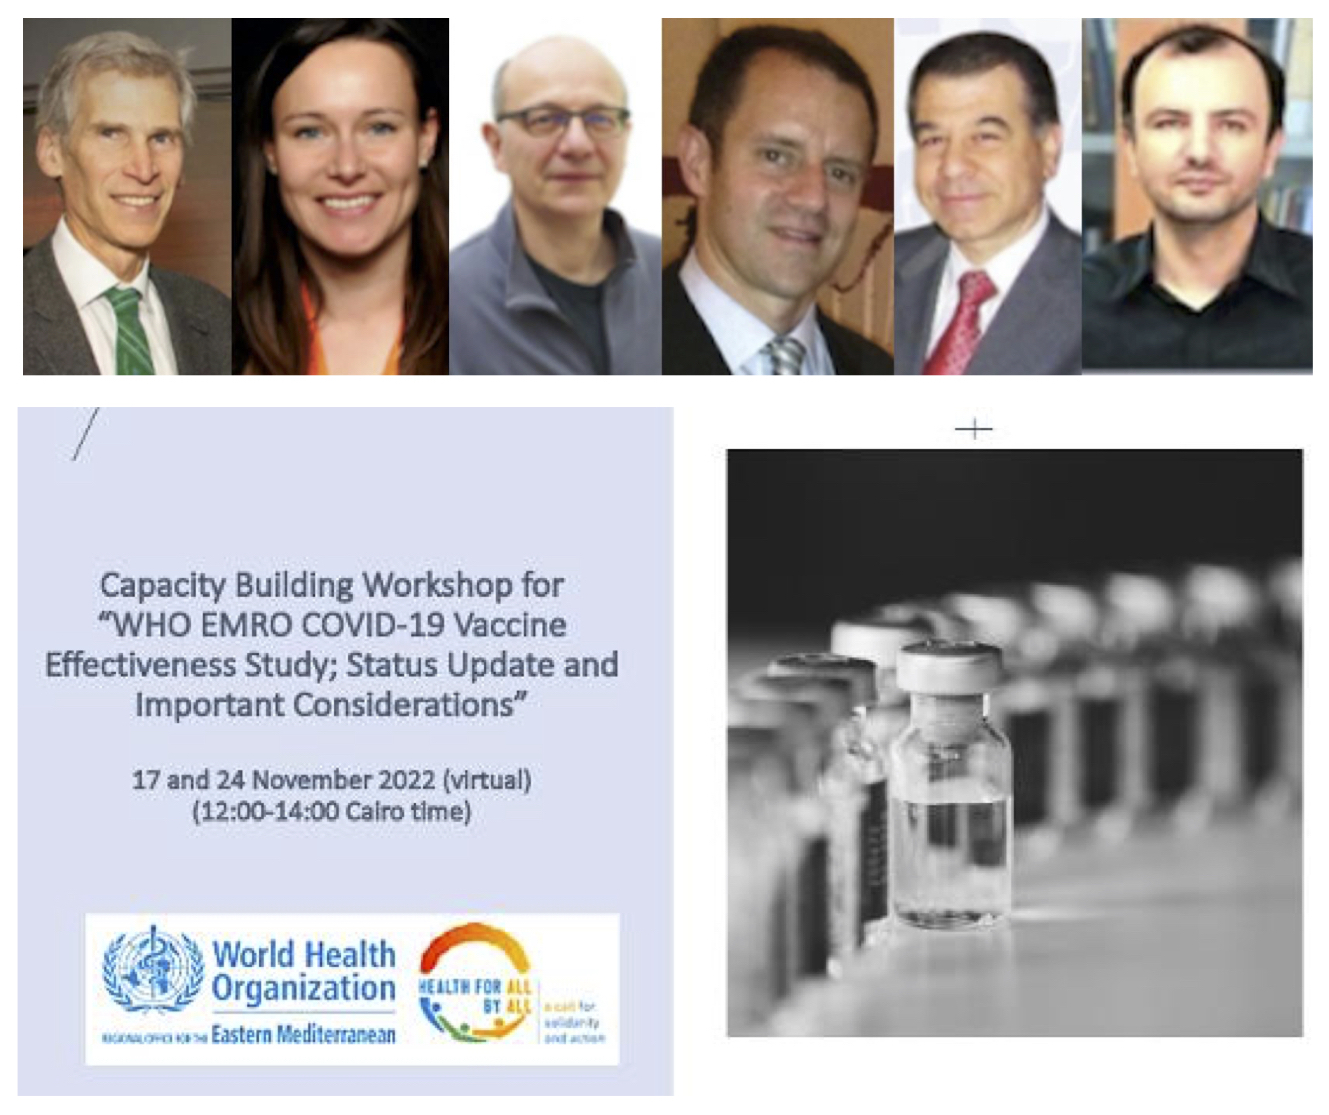 Capacity-building for COVID-19 vaccine effectiveness studies in the EMR – November 2022